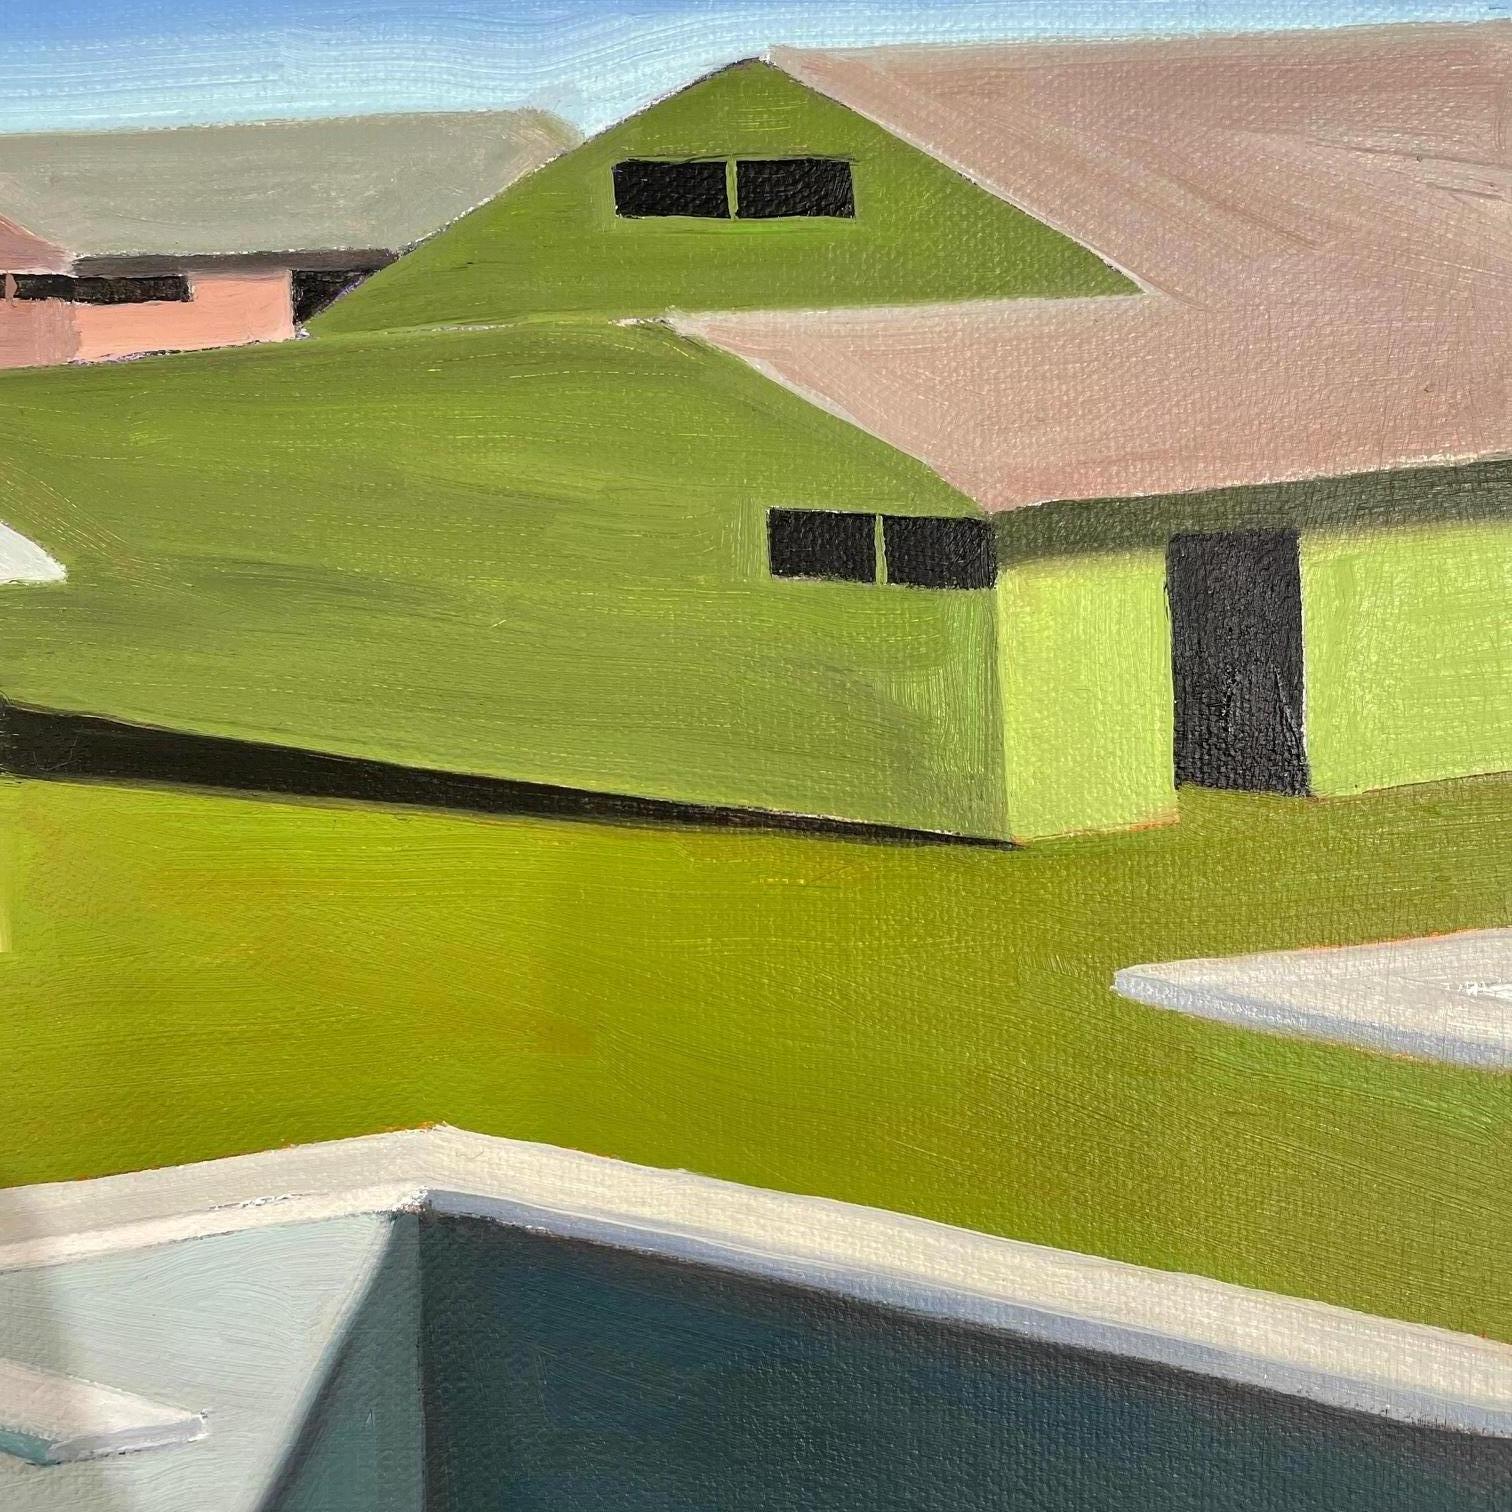 Mid-century houses with garden pools. Title - Day # 7 - Painting by R. Michael Wommack